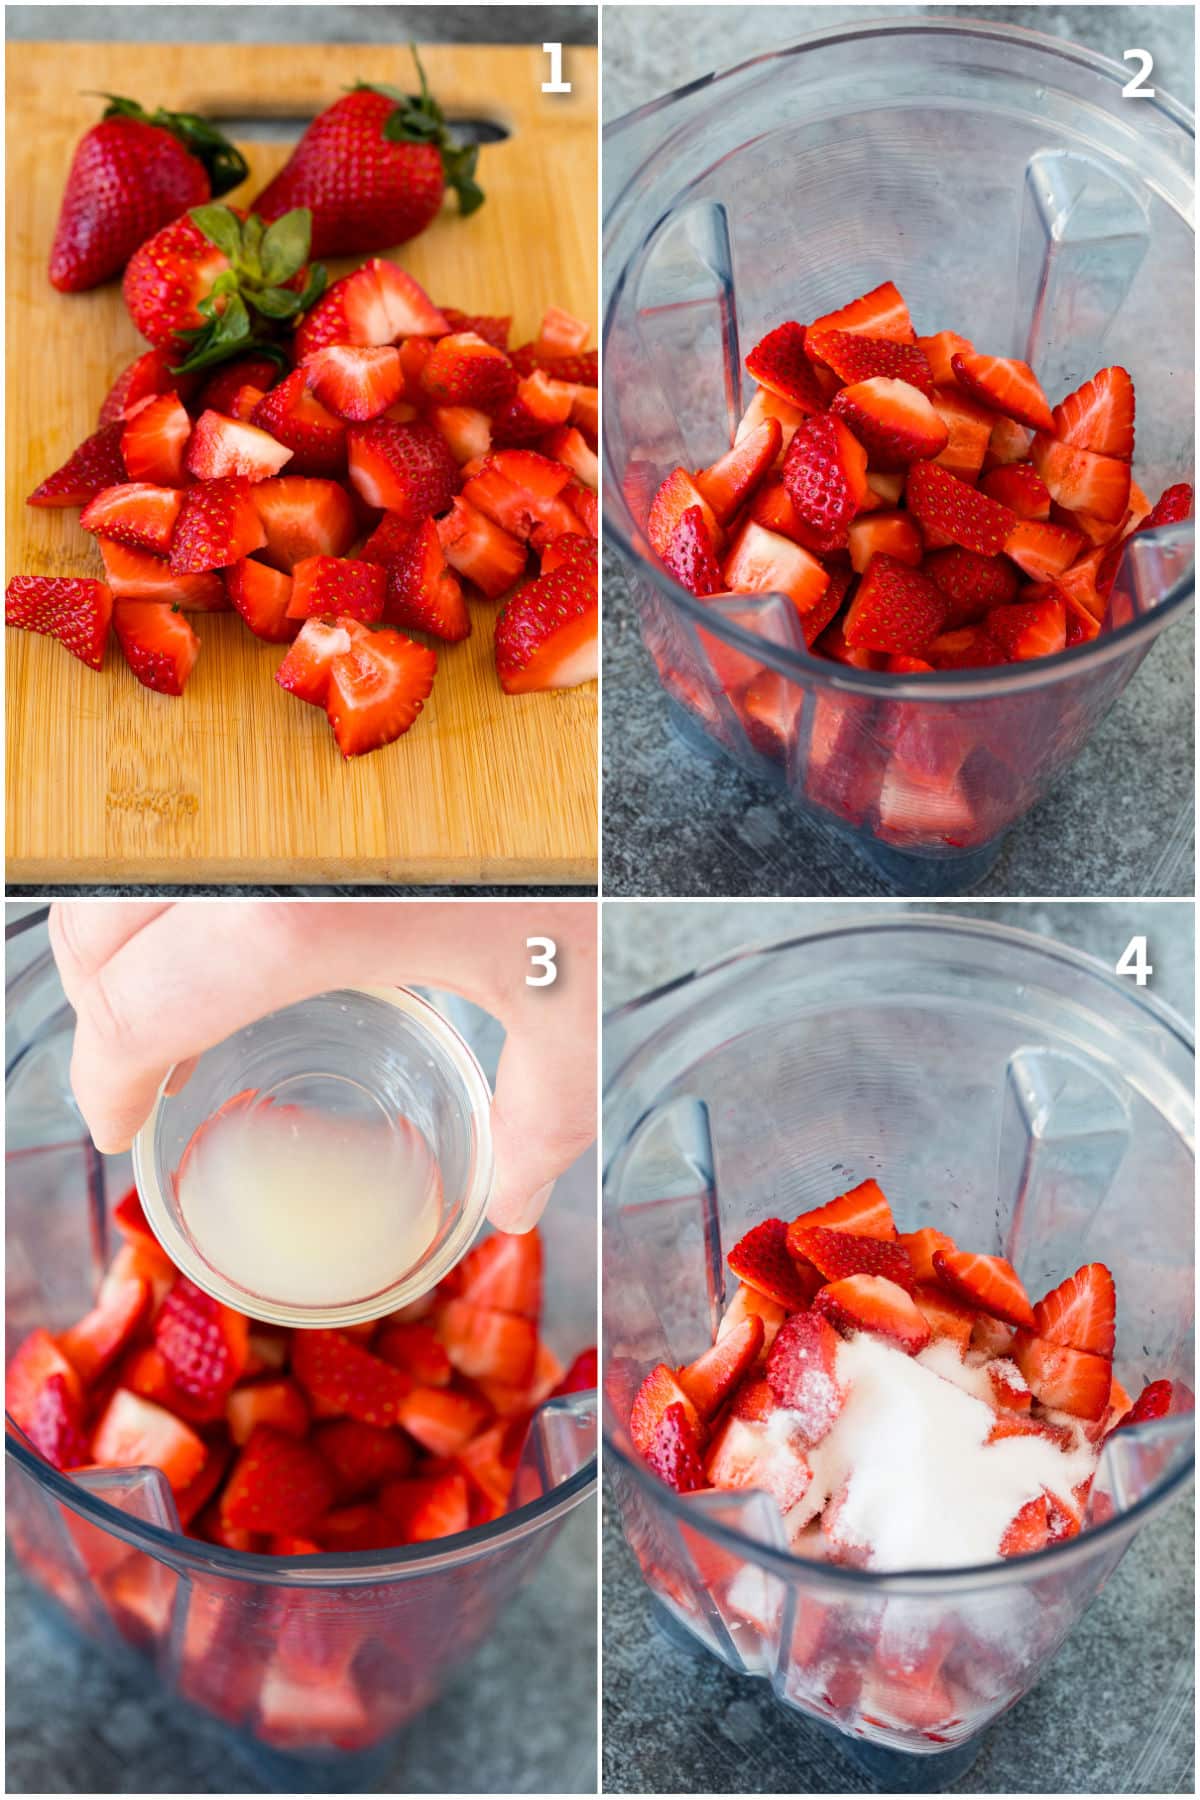 Strawberries mixed with sugar in a blender.